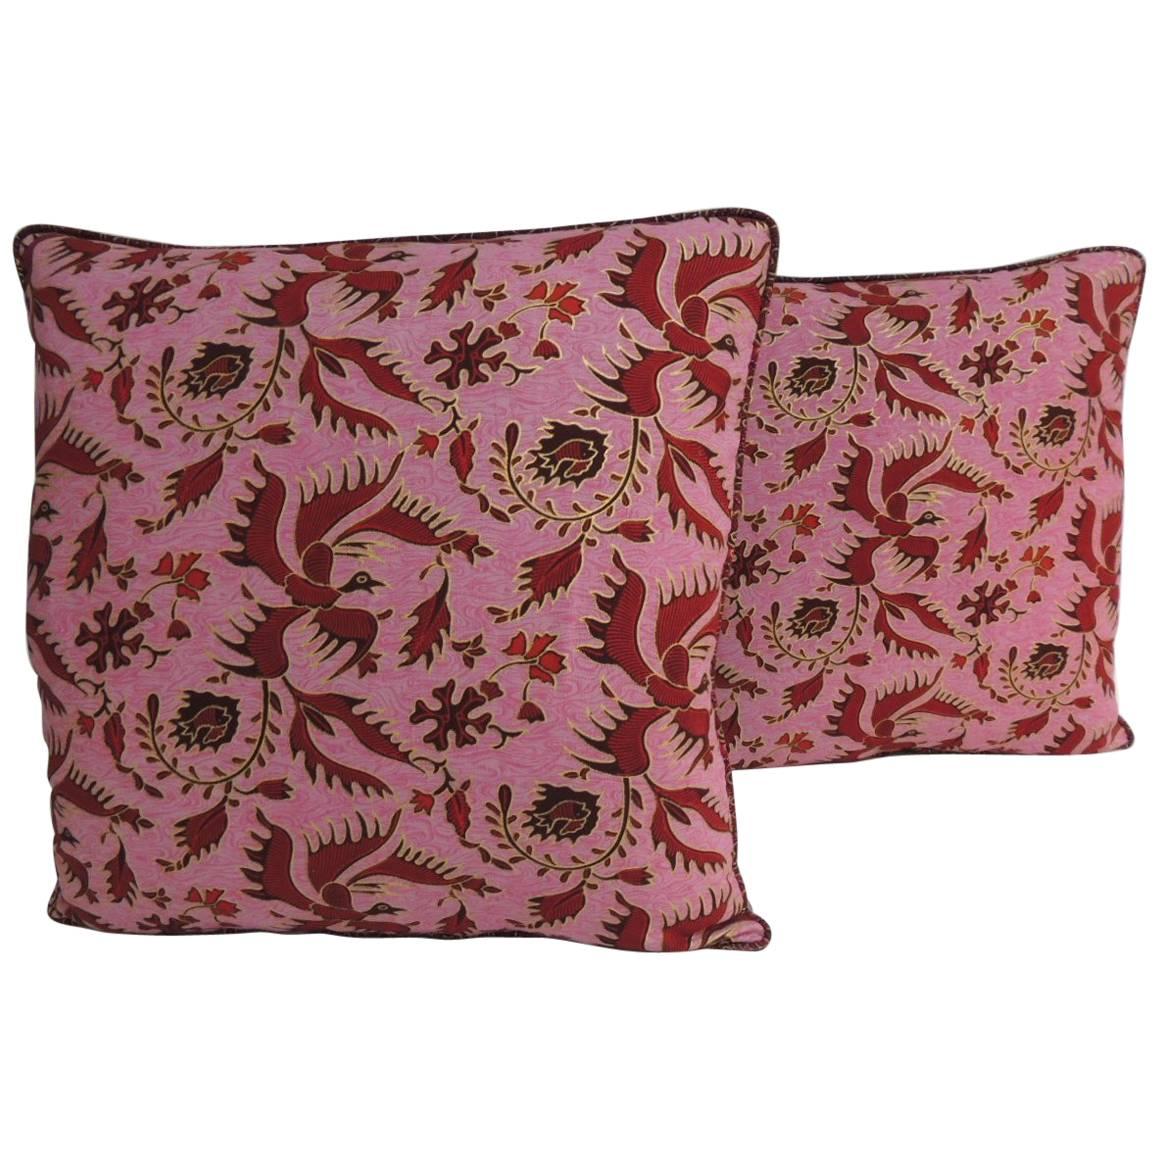 Pair of Vintage Red and Pink Hand-Blocked Batik Decorative Pillows